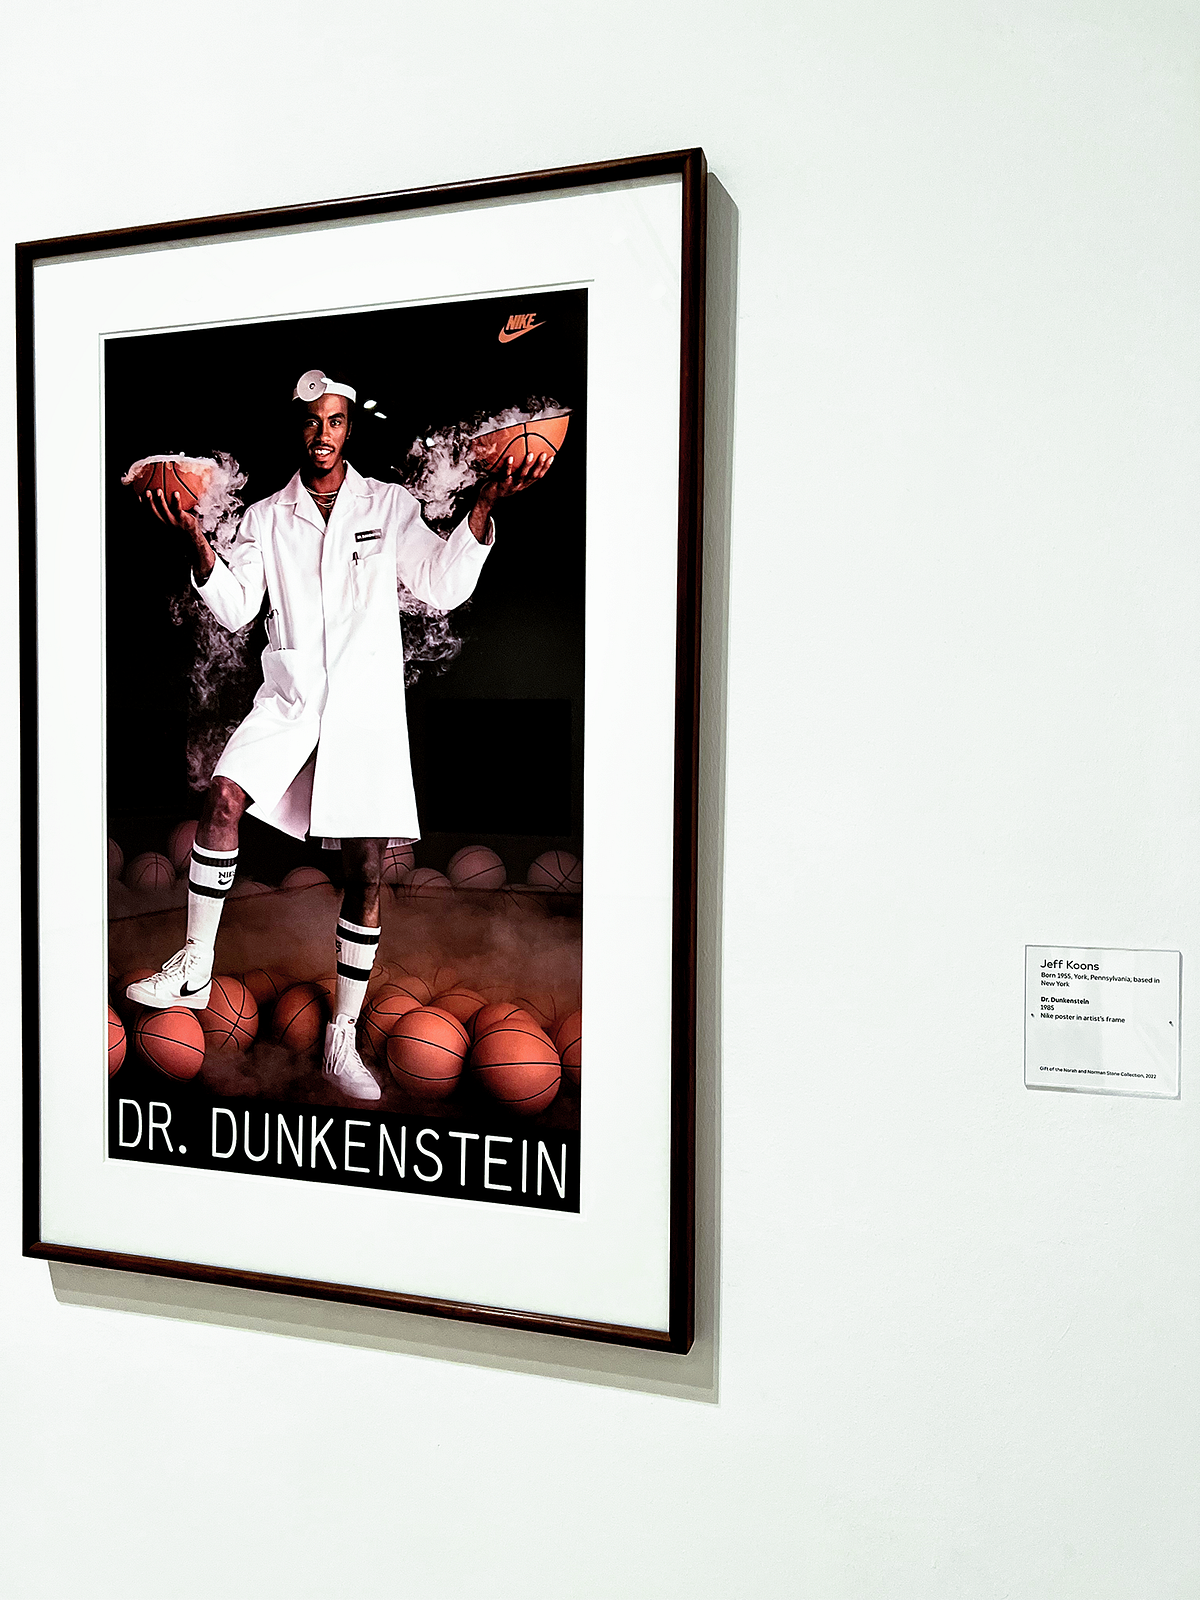 The Poster: Dr. Dunkenstein by Jeff Koons | by Anh Pham | Medium